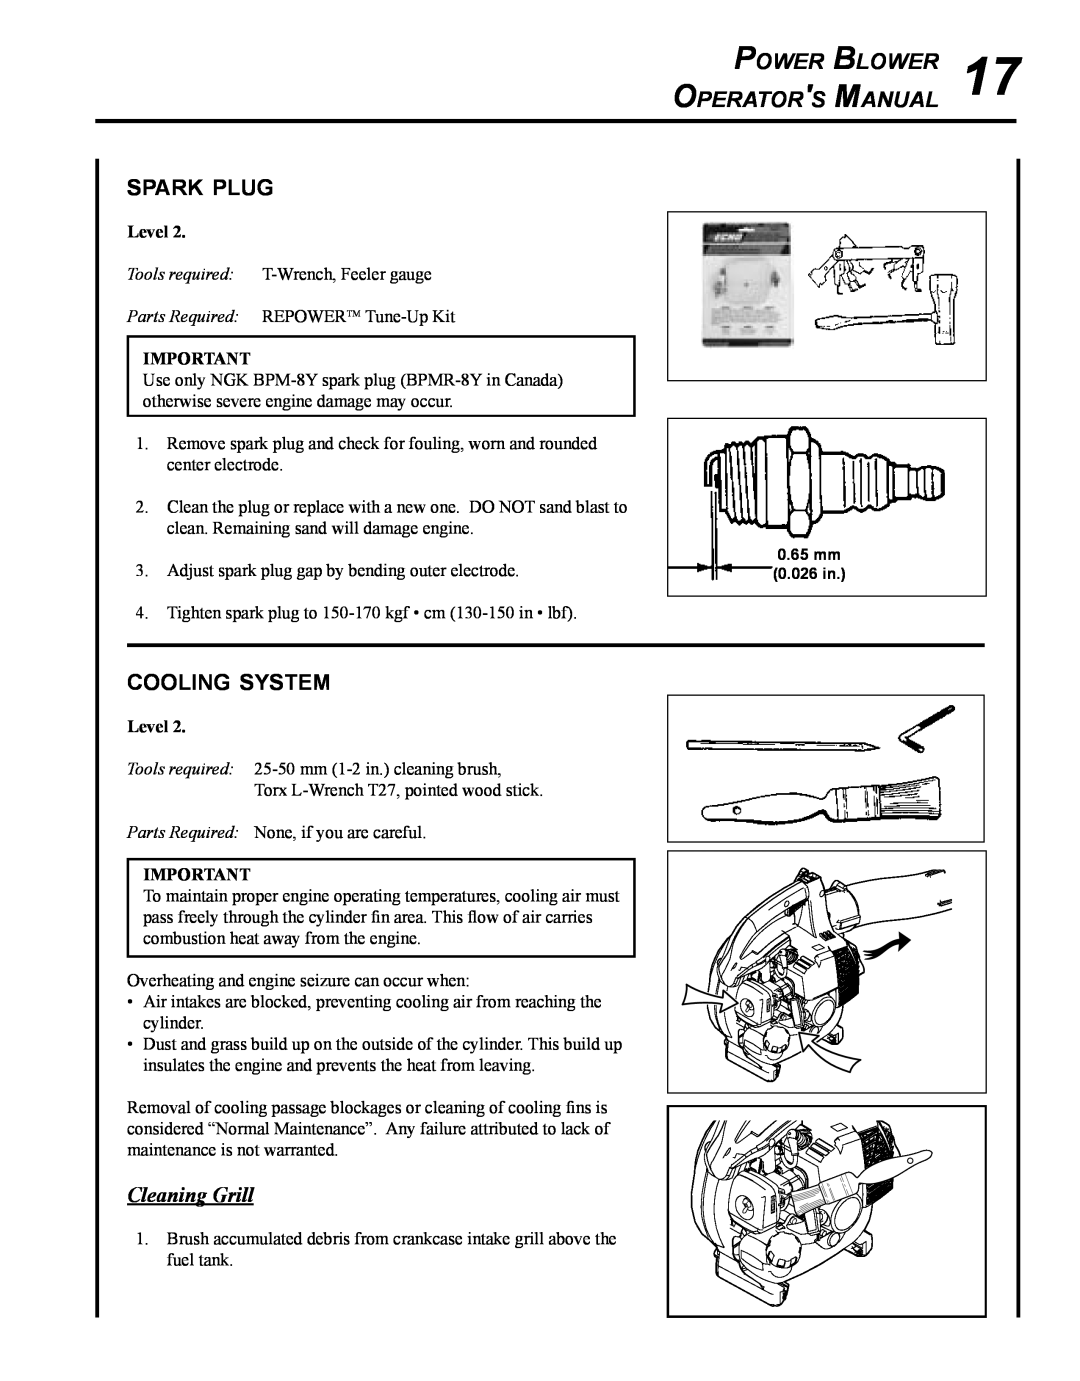 Echo PB-250 manual spark plug, cooling system, Cleaning Grill, Power Blower Operators Manual 